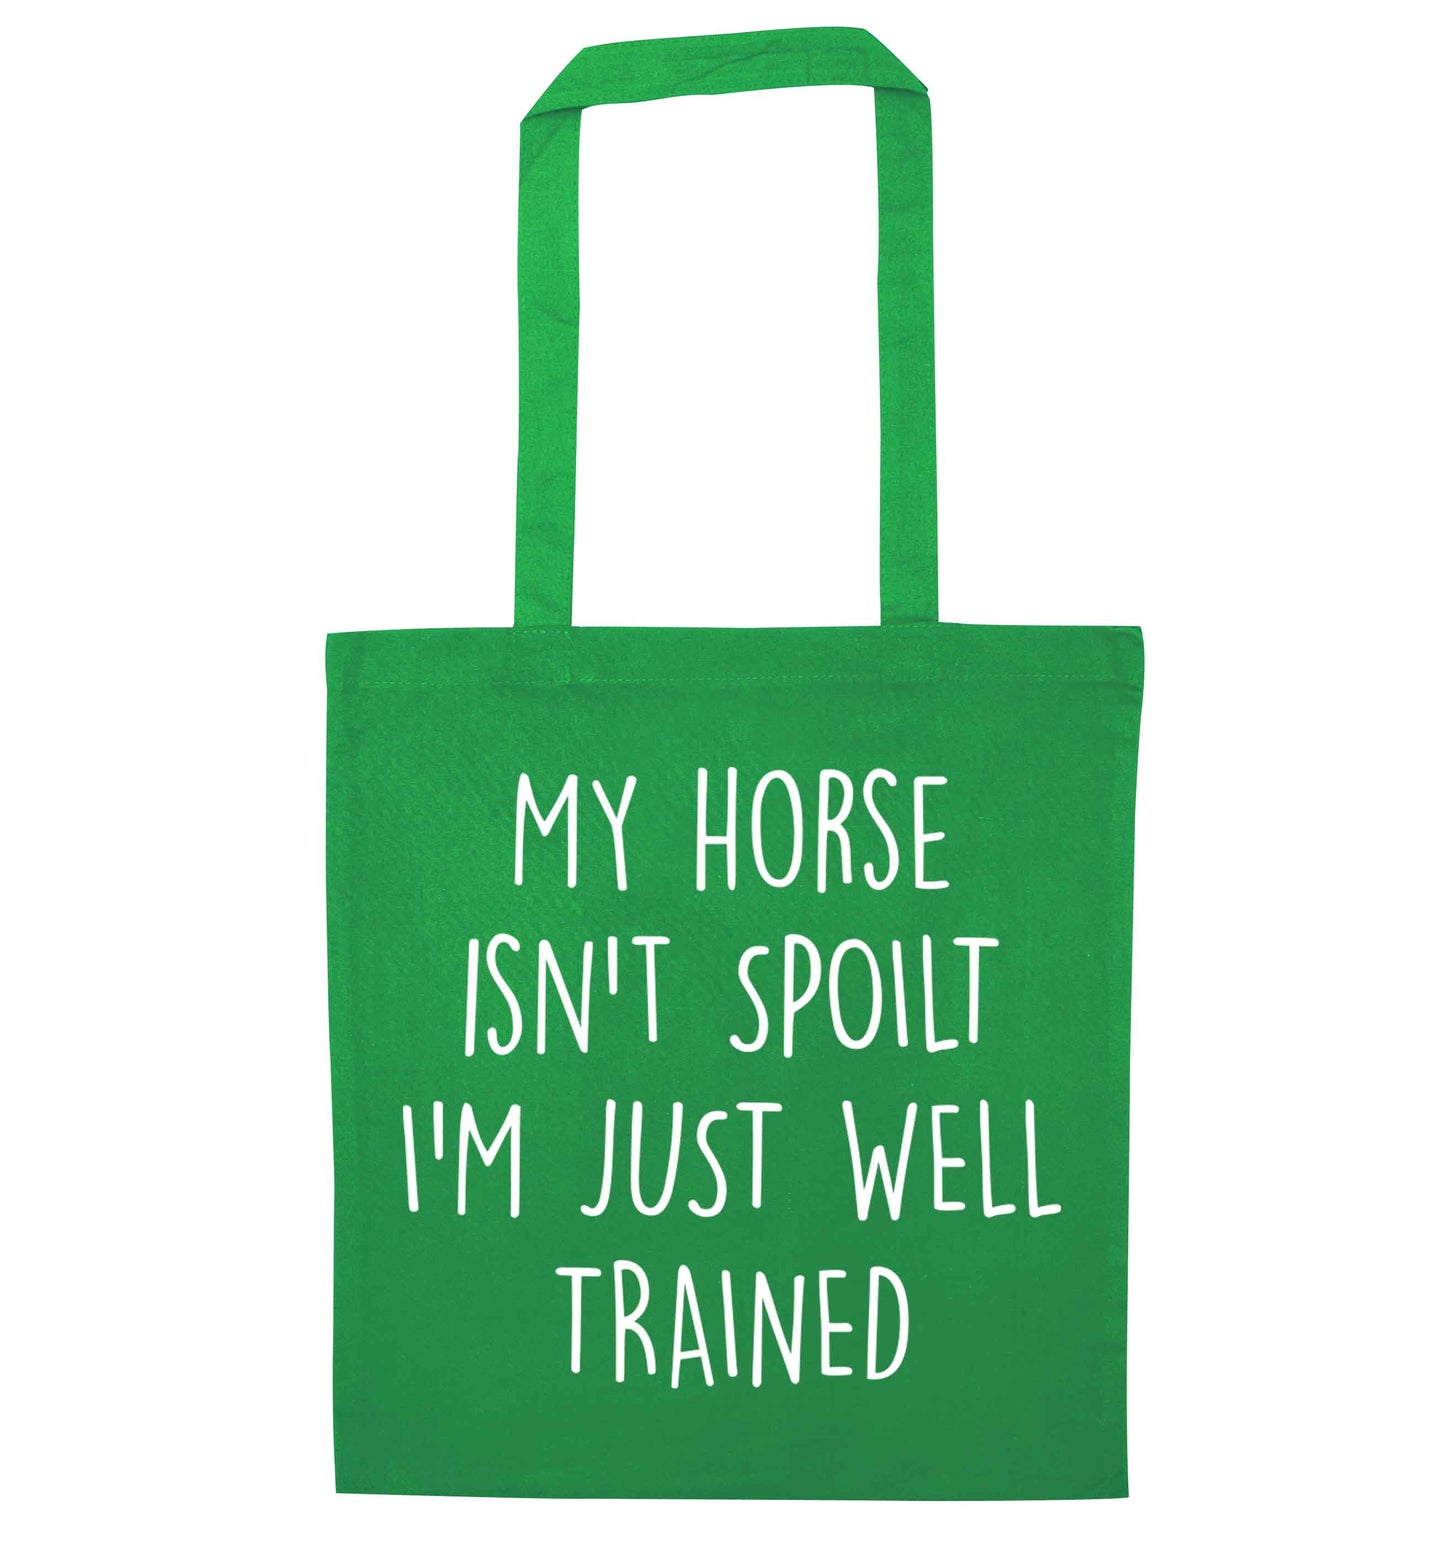 My horse isn't spoilt I'm just well trained green tote bag